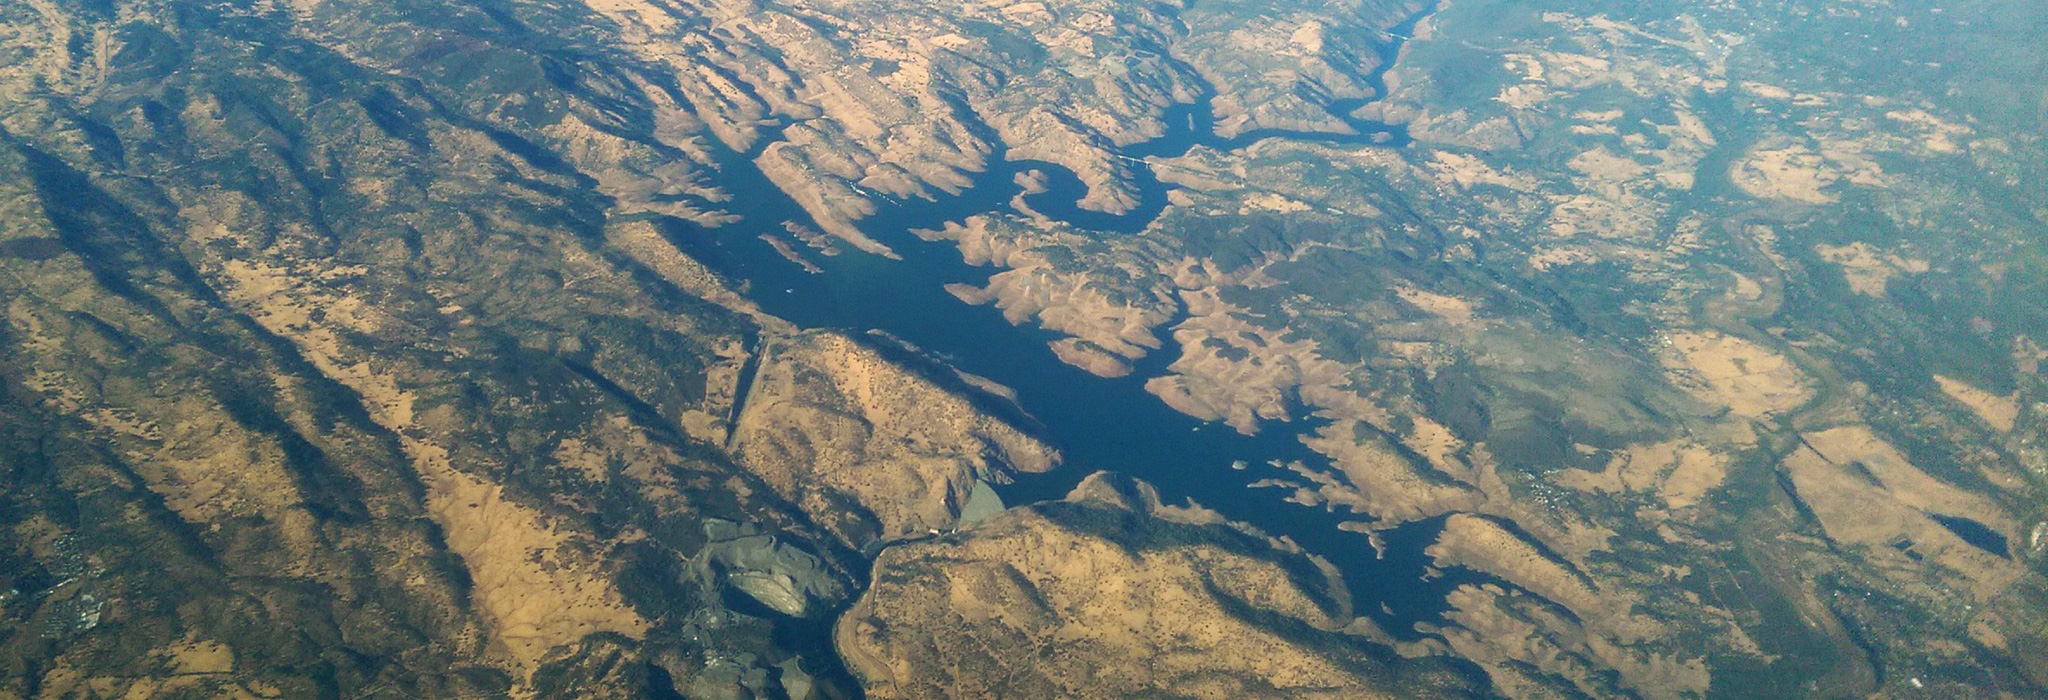 New Melones Lake, Now with More Contours 